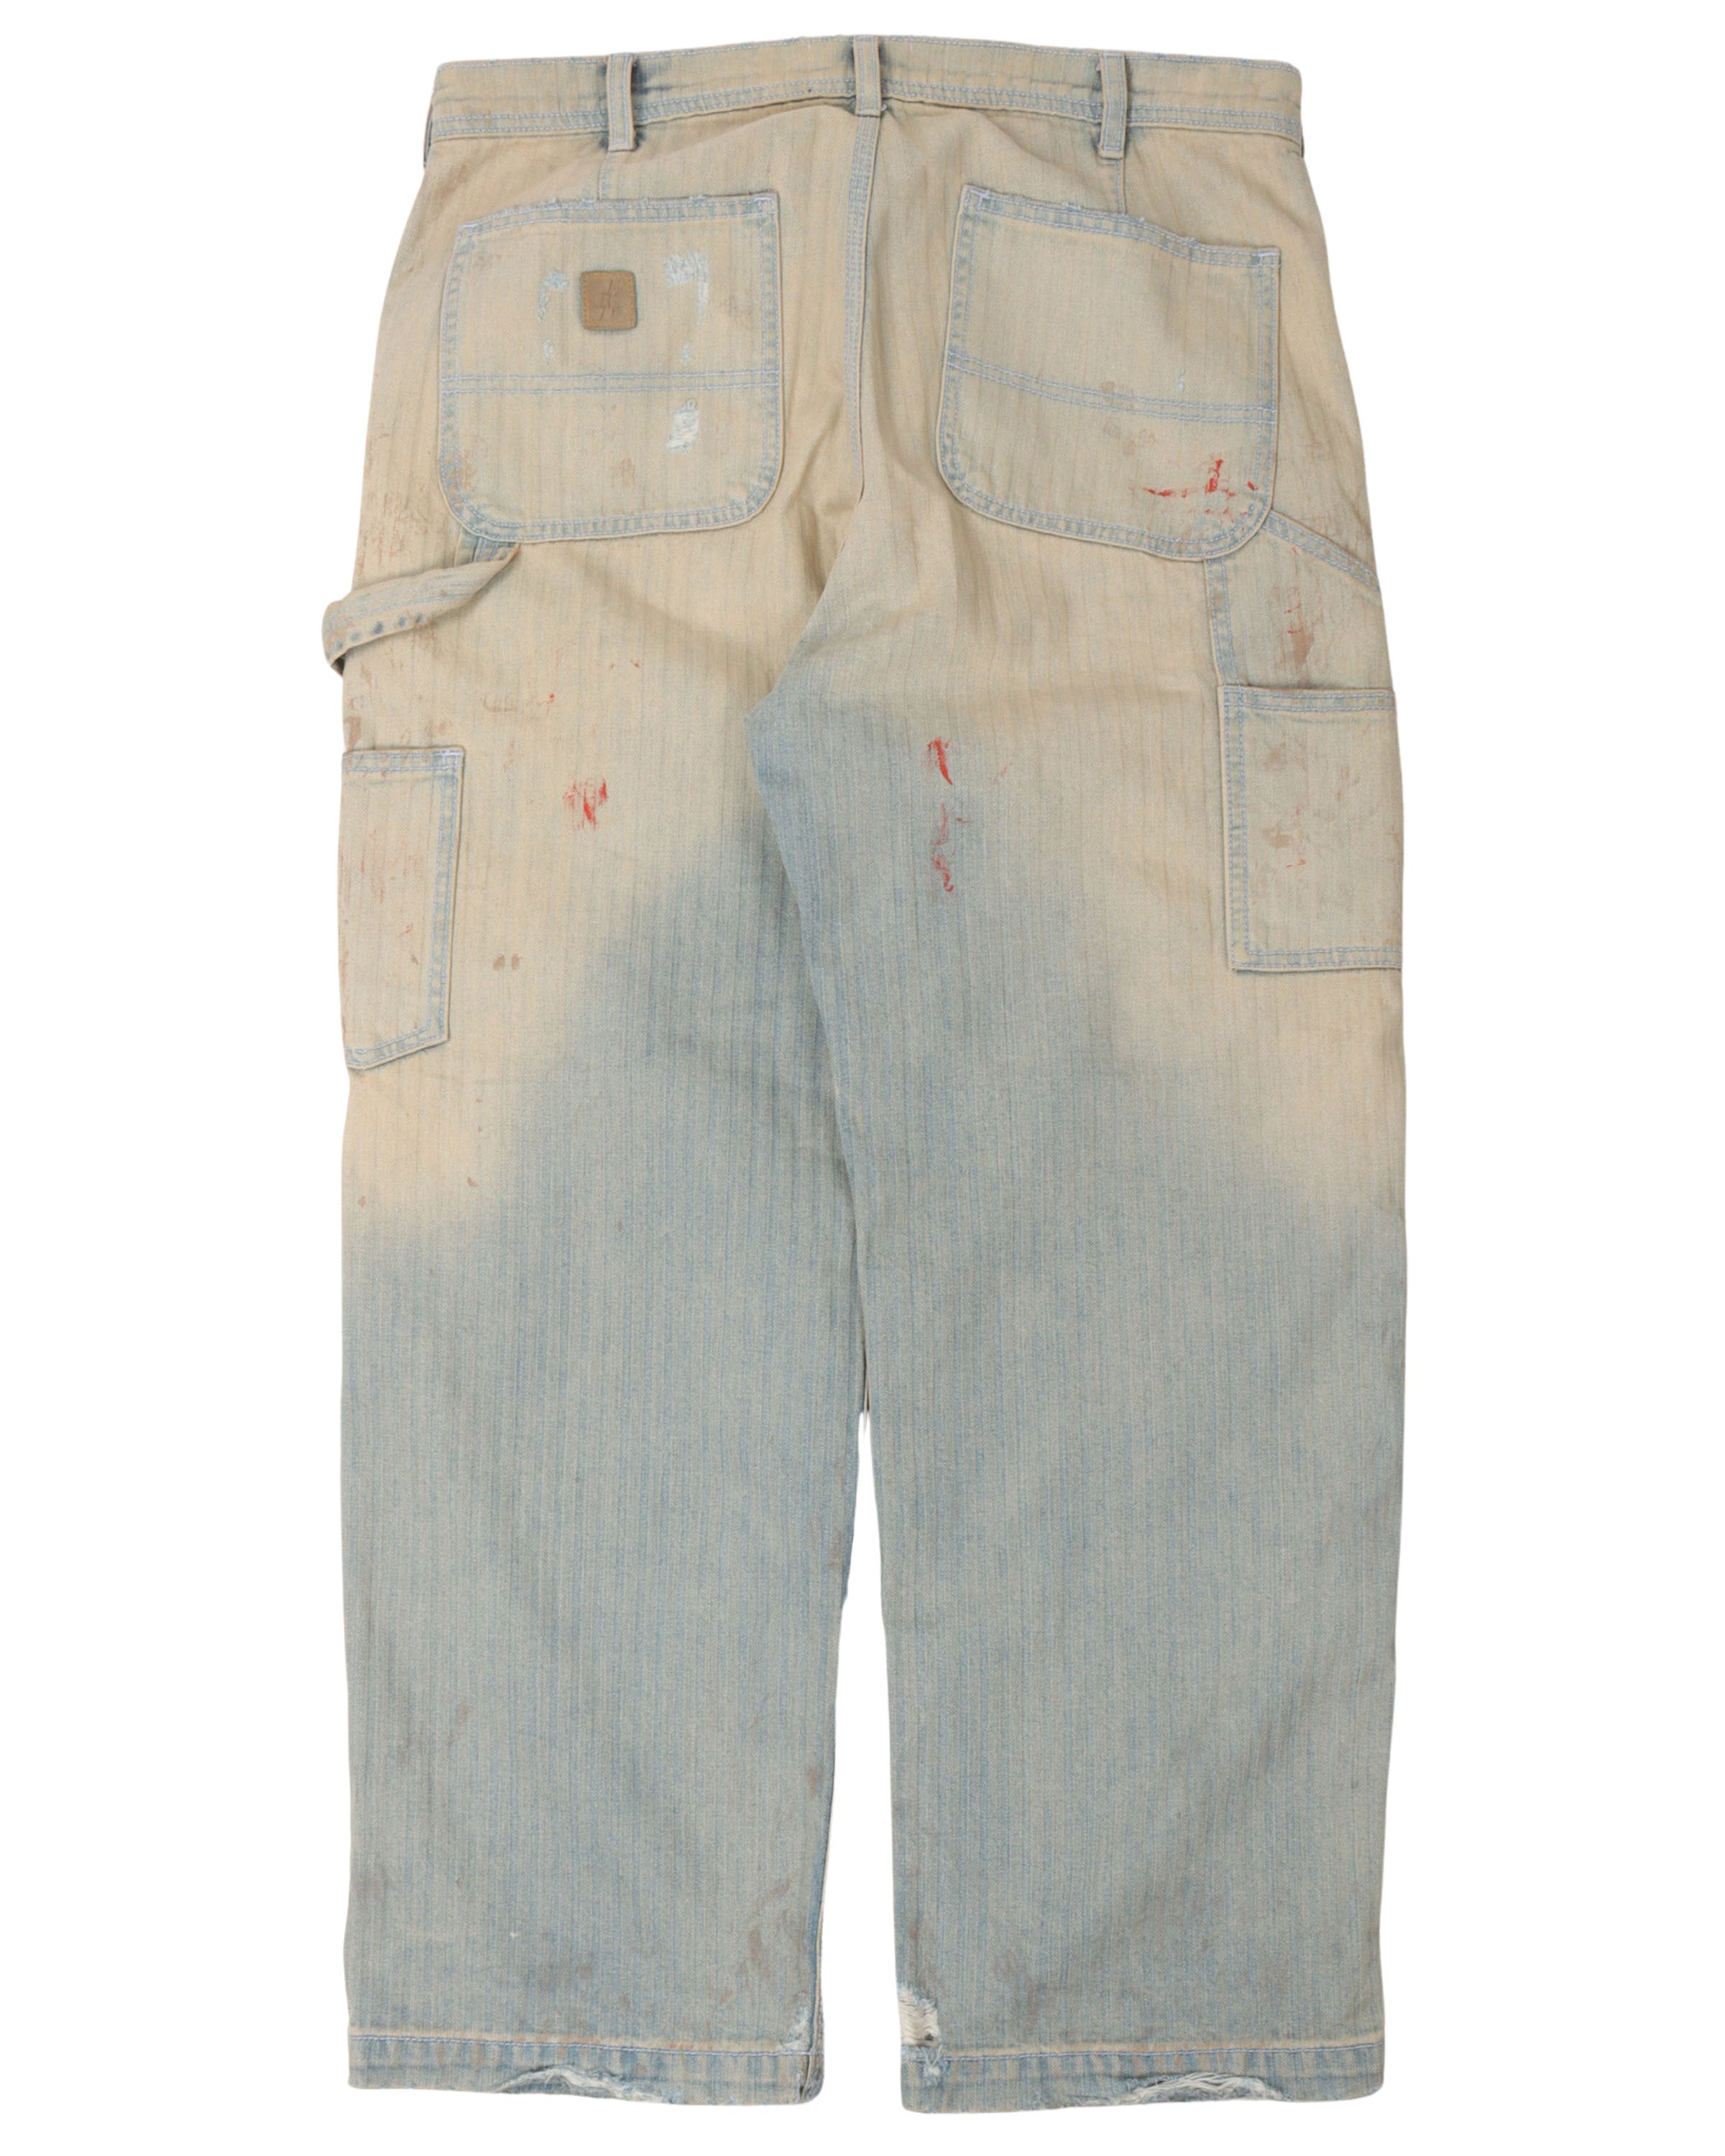 SS23 Blood-Stained Paint Pants